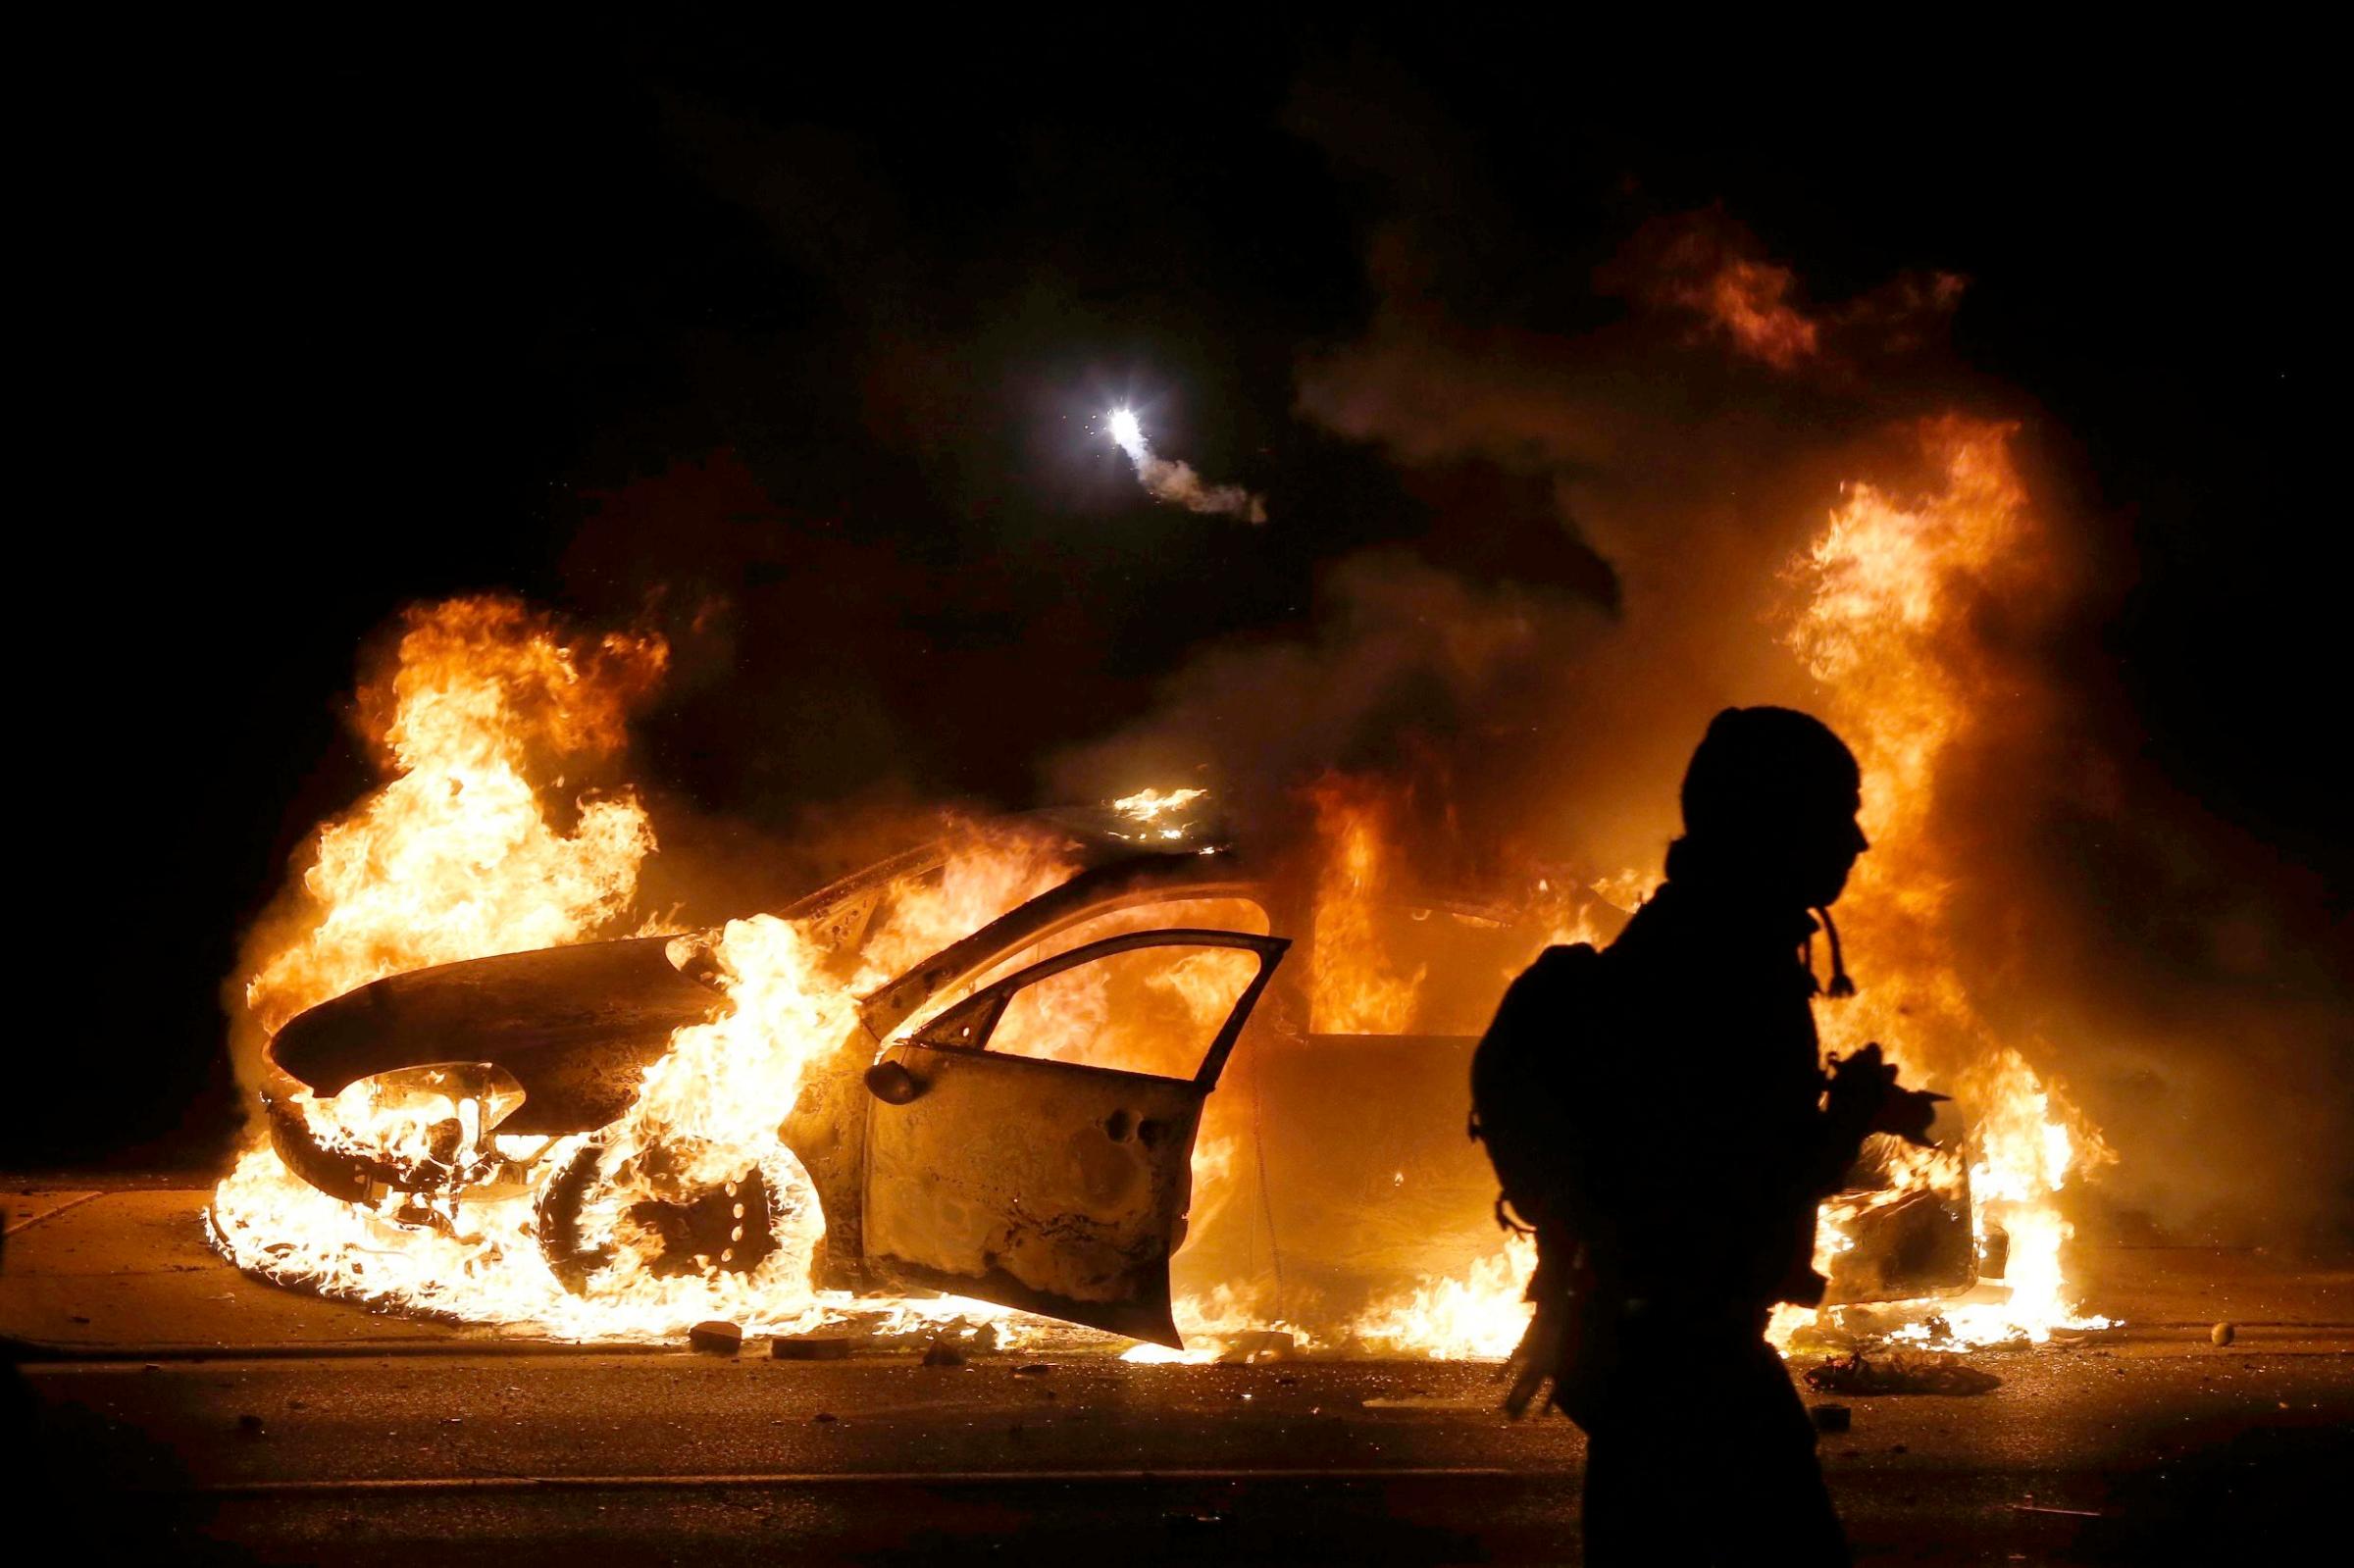 A car burns on the street after a grand jury returned no indictment in the shooting of Michael Brown in Ferguson, Missouri